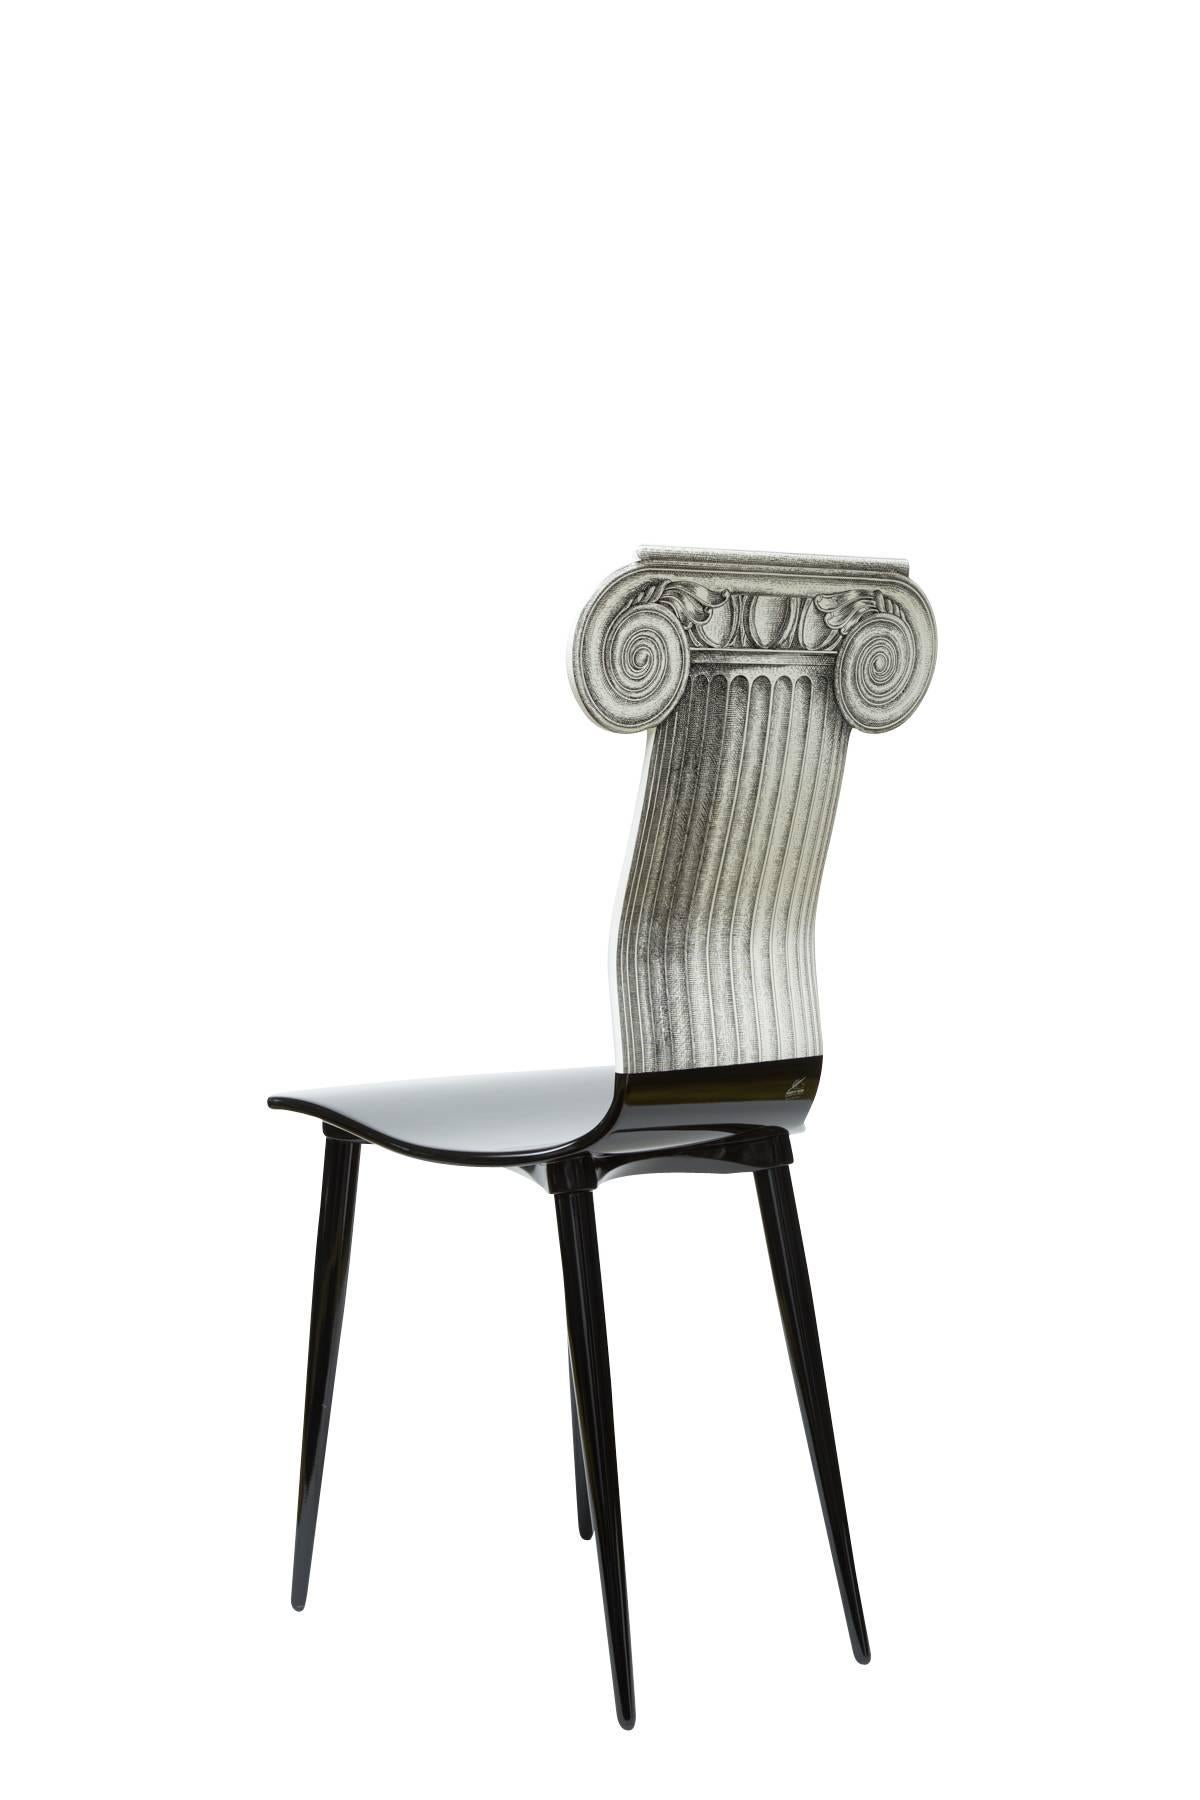 fornasetti chairs